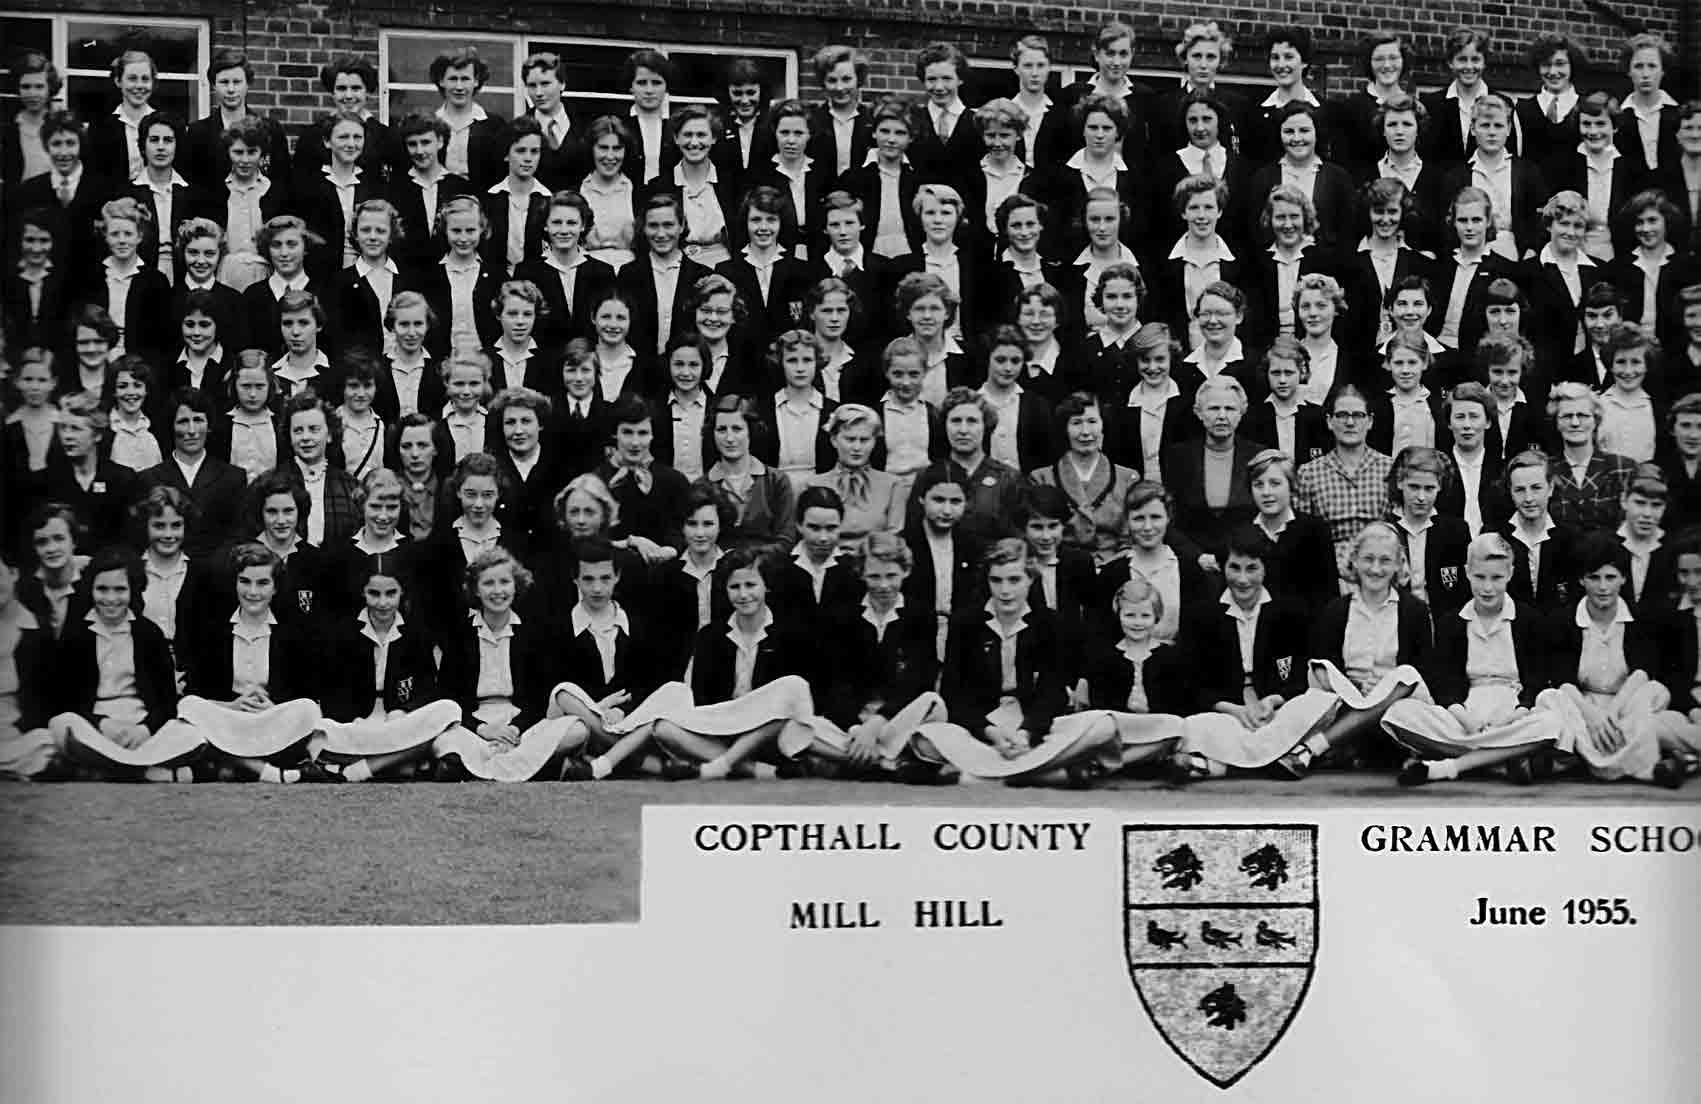 Third left section of the 1955 school photograph for Copthall County Grammar School